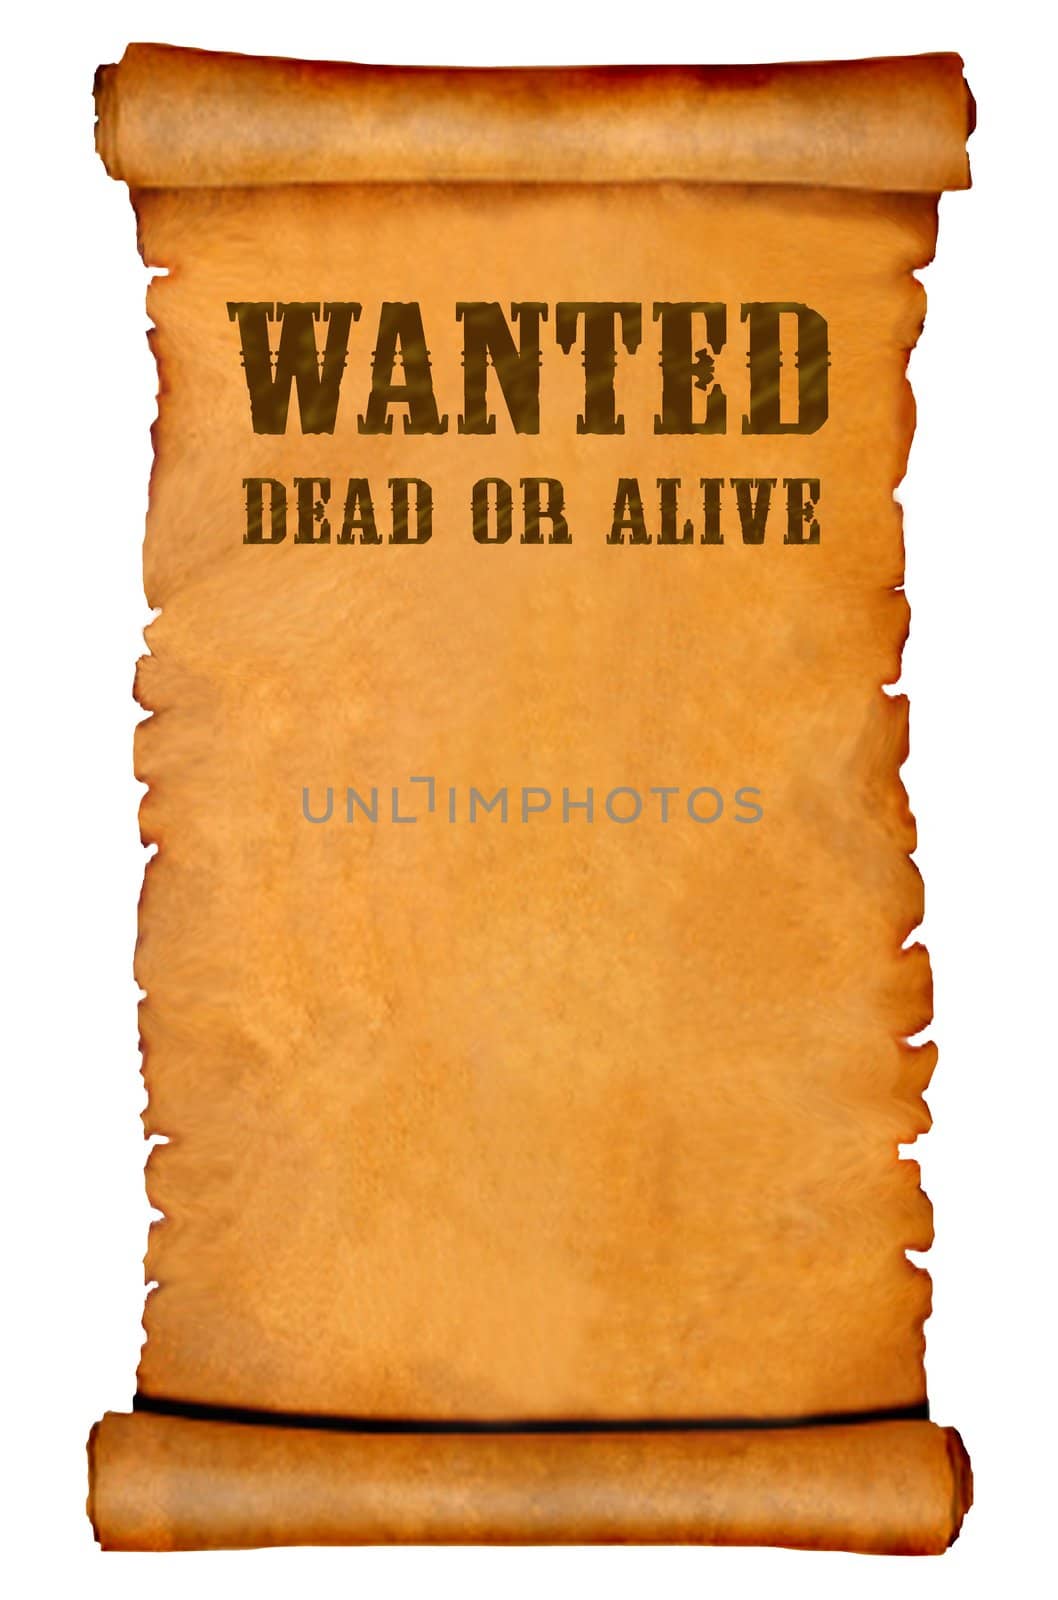 Wanted dead or alive poster on an ancient parchment